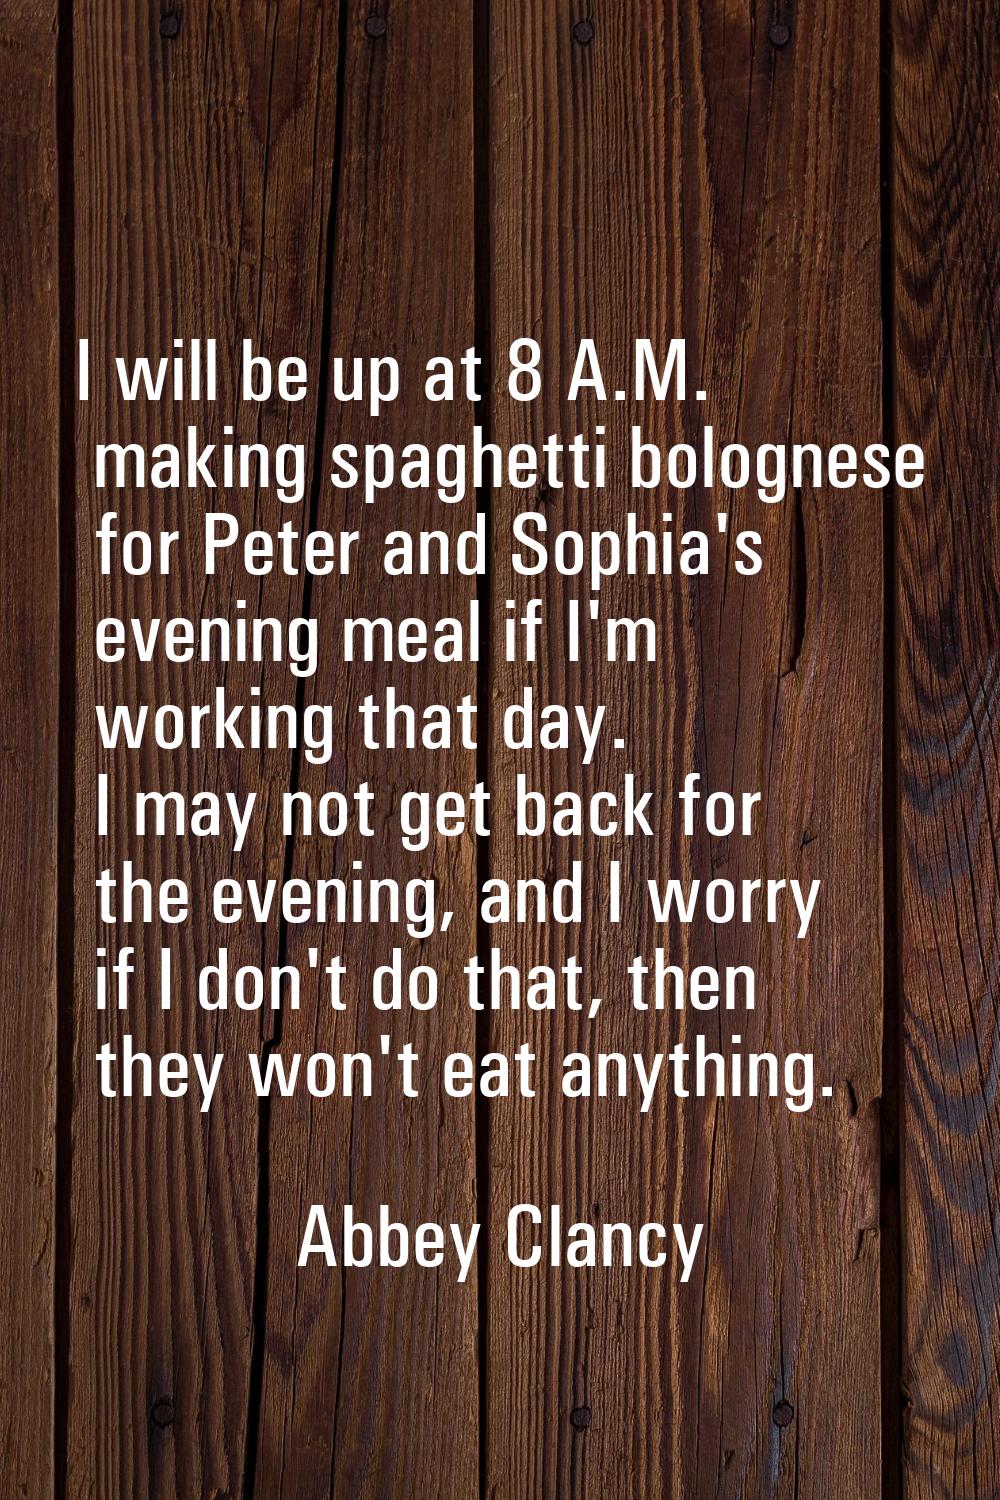 I will be up at 8 A.M. making spaghetti bolognese for Peter and Sophia's evening meal if I'm workin